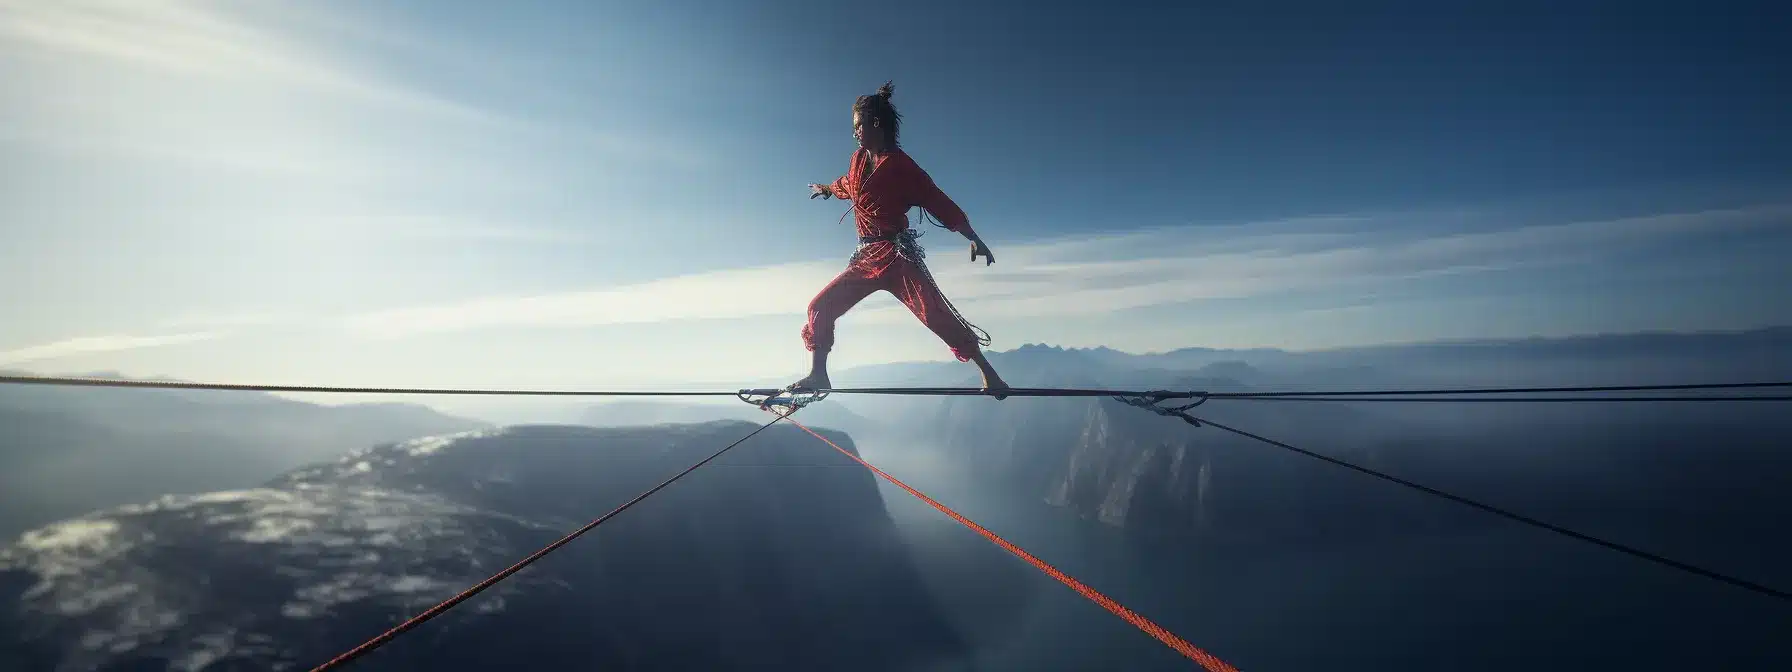 A Tightrope Walker Navigating Between Crashing Reputation And Immense Trust.